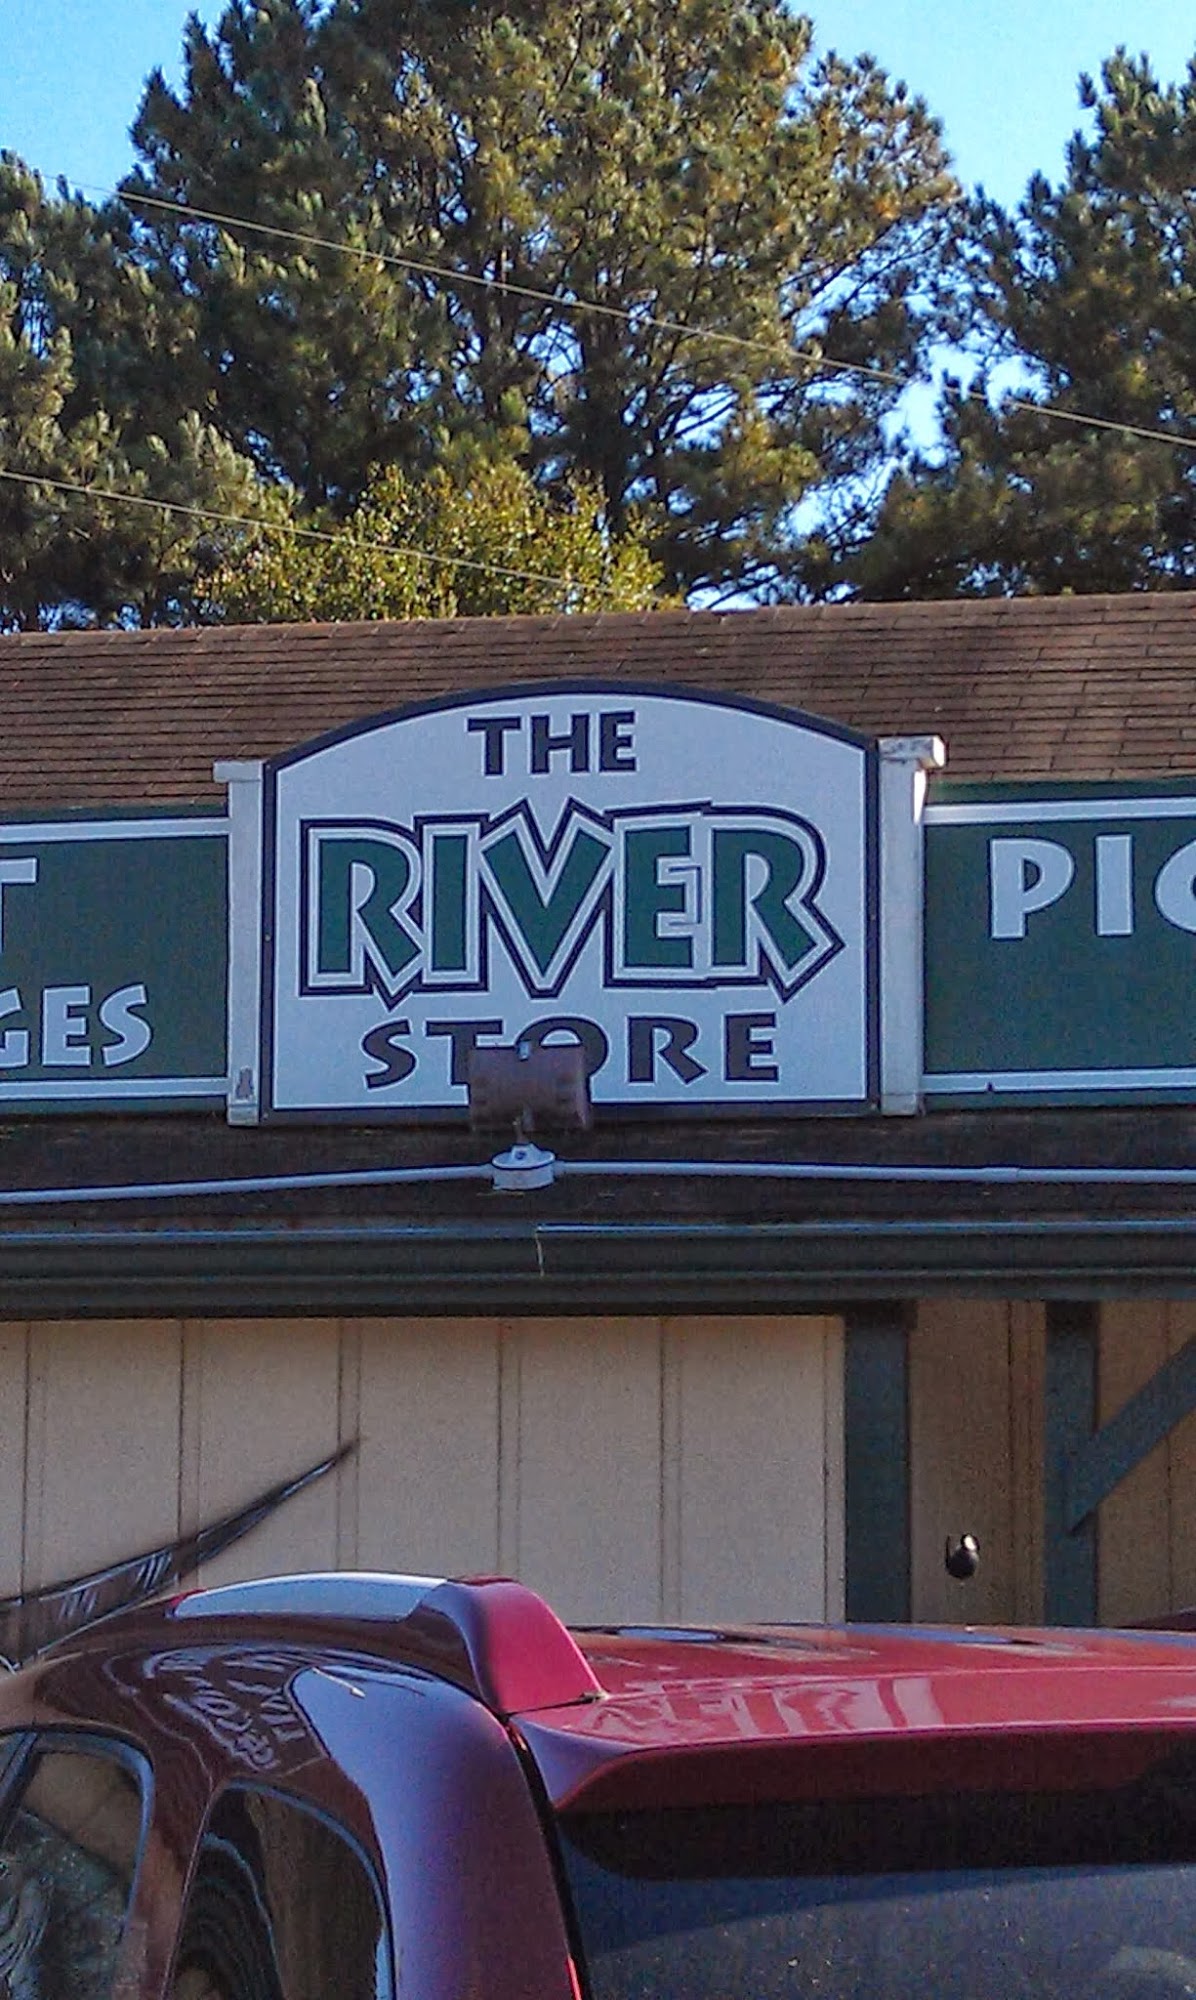 The River Store